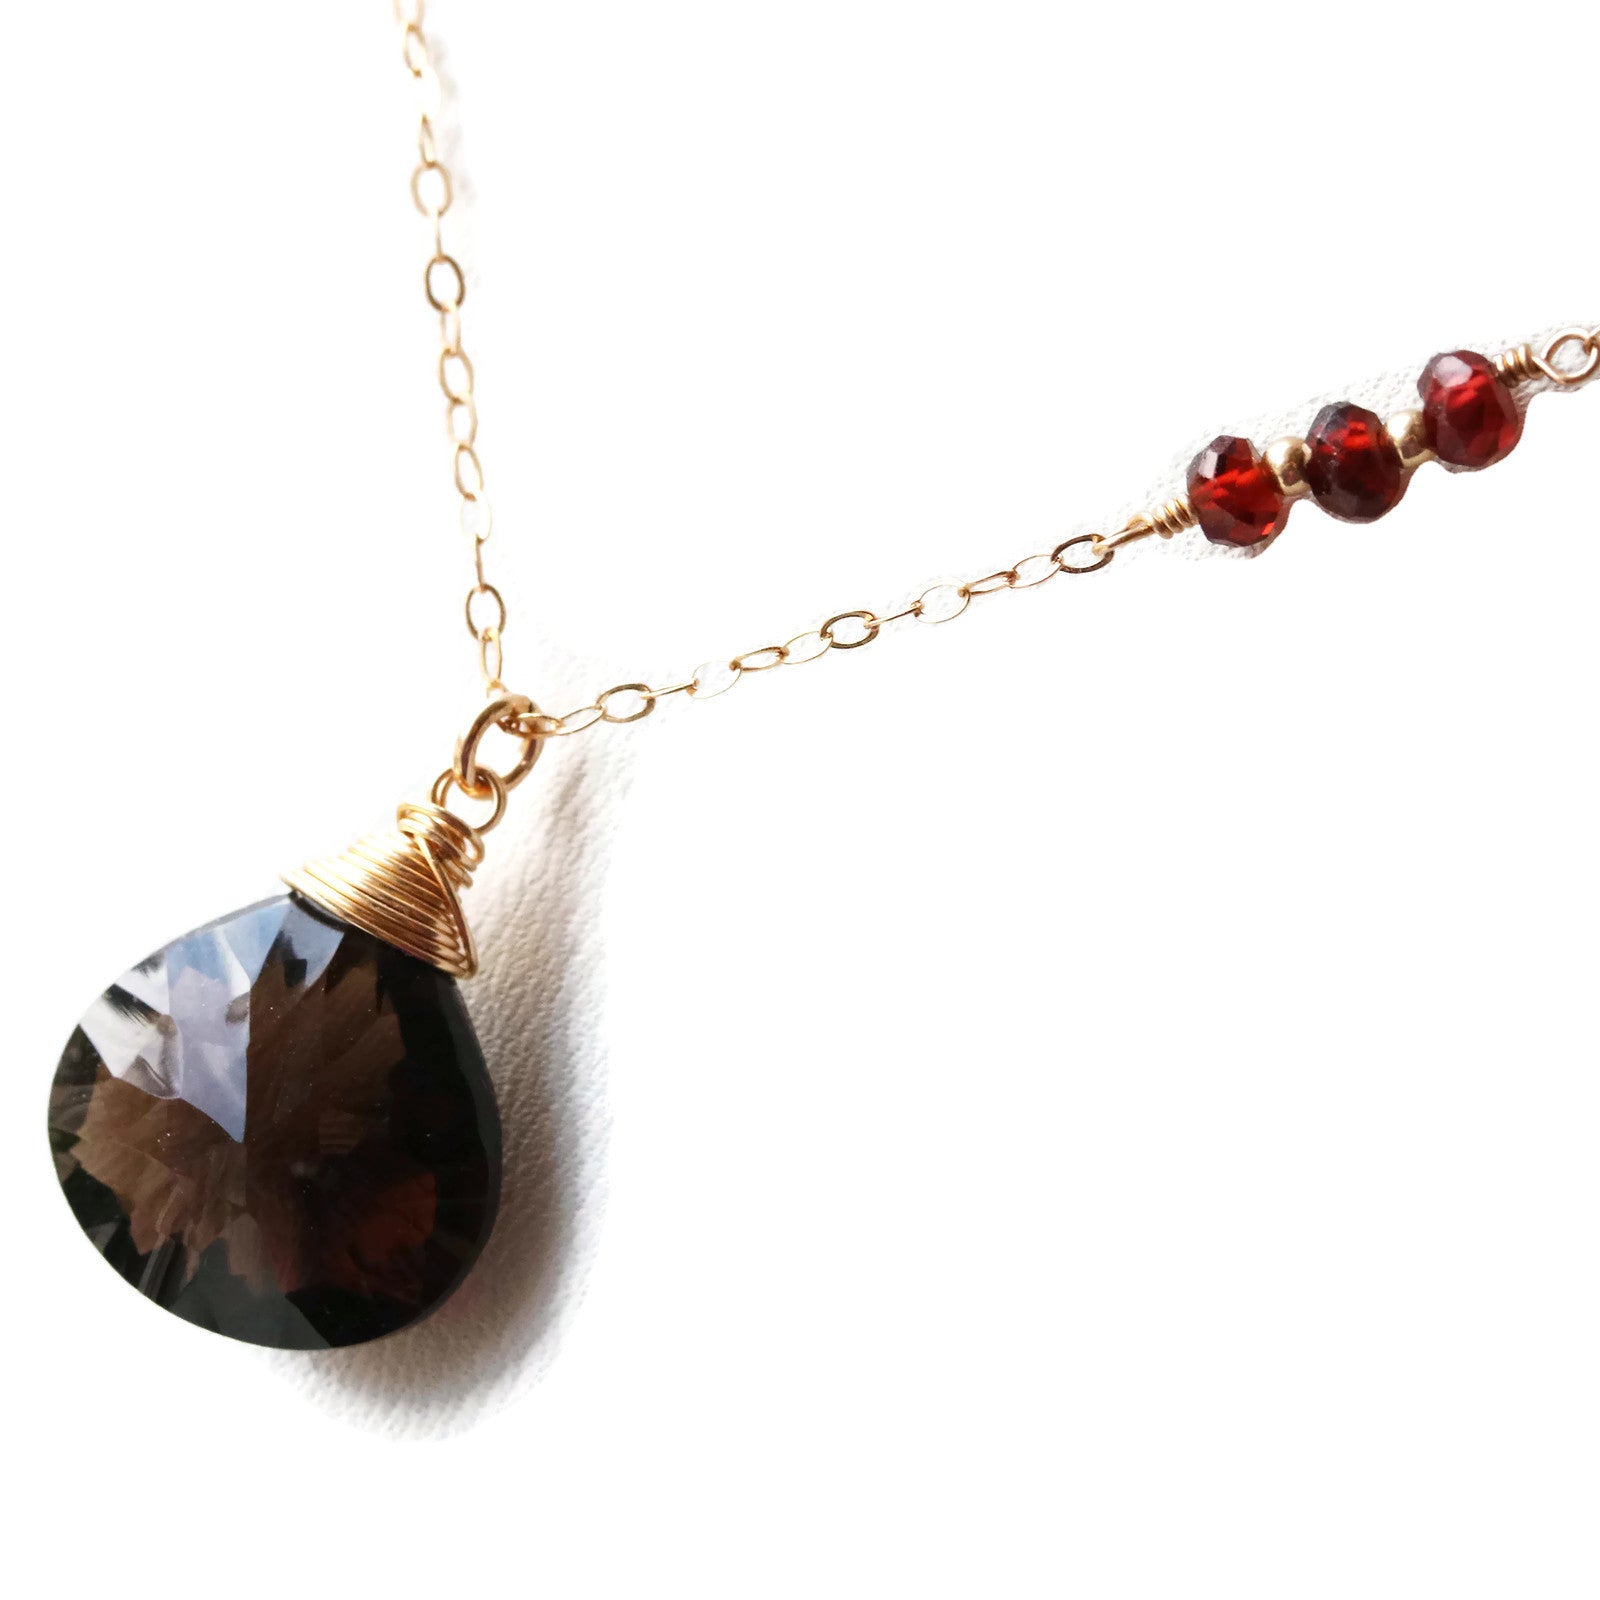 Smoky Quartz 14 k Gold Filled Pendant with Red Garnets - Sienna Grace Jewelry | Pretty Little Handcrafted Sparkles